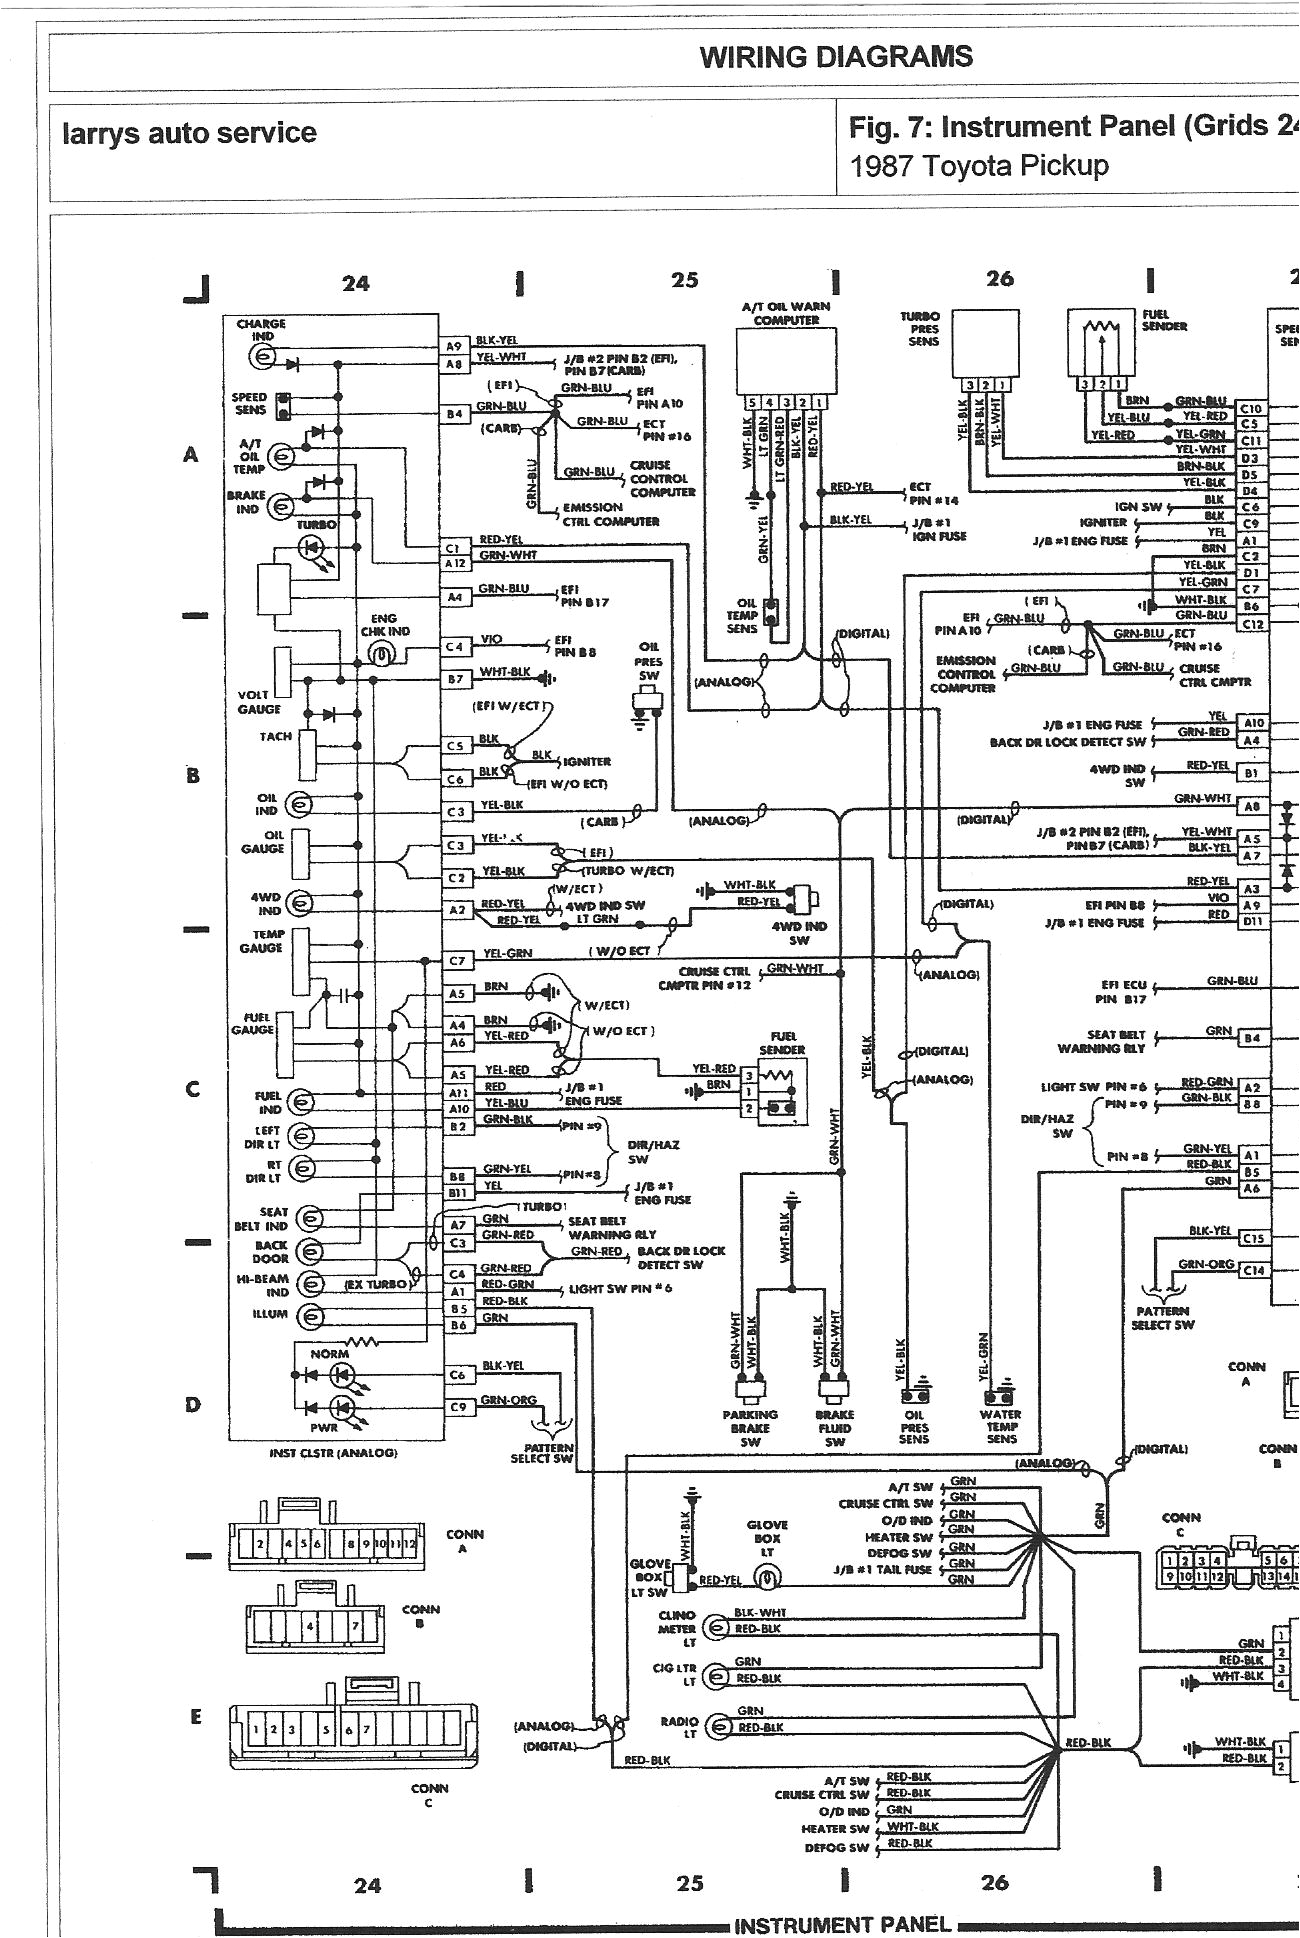 1986 toyota 4x4 wiring harness wiring diagram list 1986 toyota pickup front bumper 1986 circuit diagrams